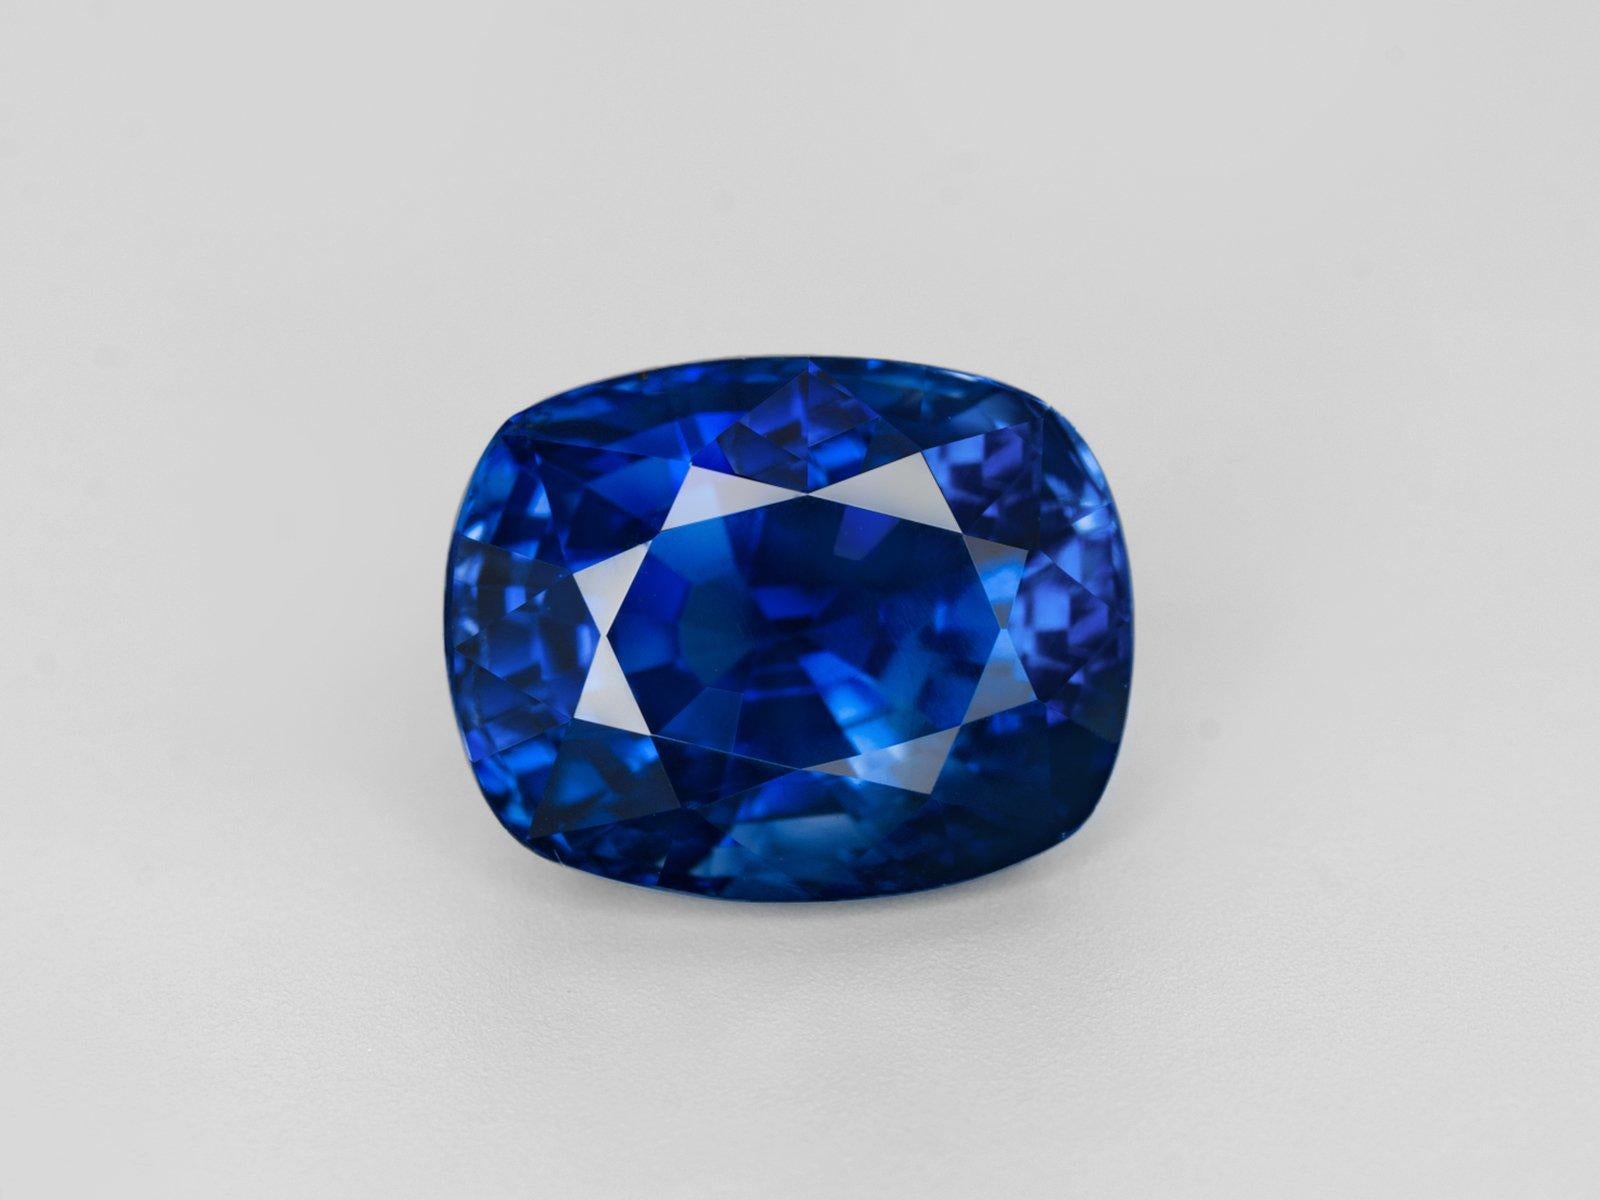 Presenting a rare marvel from the heart of the Himalayas: the Kashmir Sapphire from India.

Discovered in 1881 in the Zanskar range of the Himalayan mountains, Kashmir Sapphires are legendary for their unparalleled beauty and scarcity. Characterized